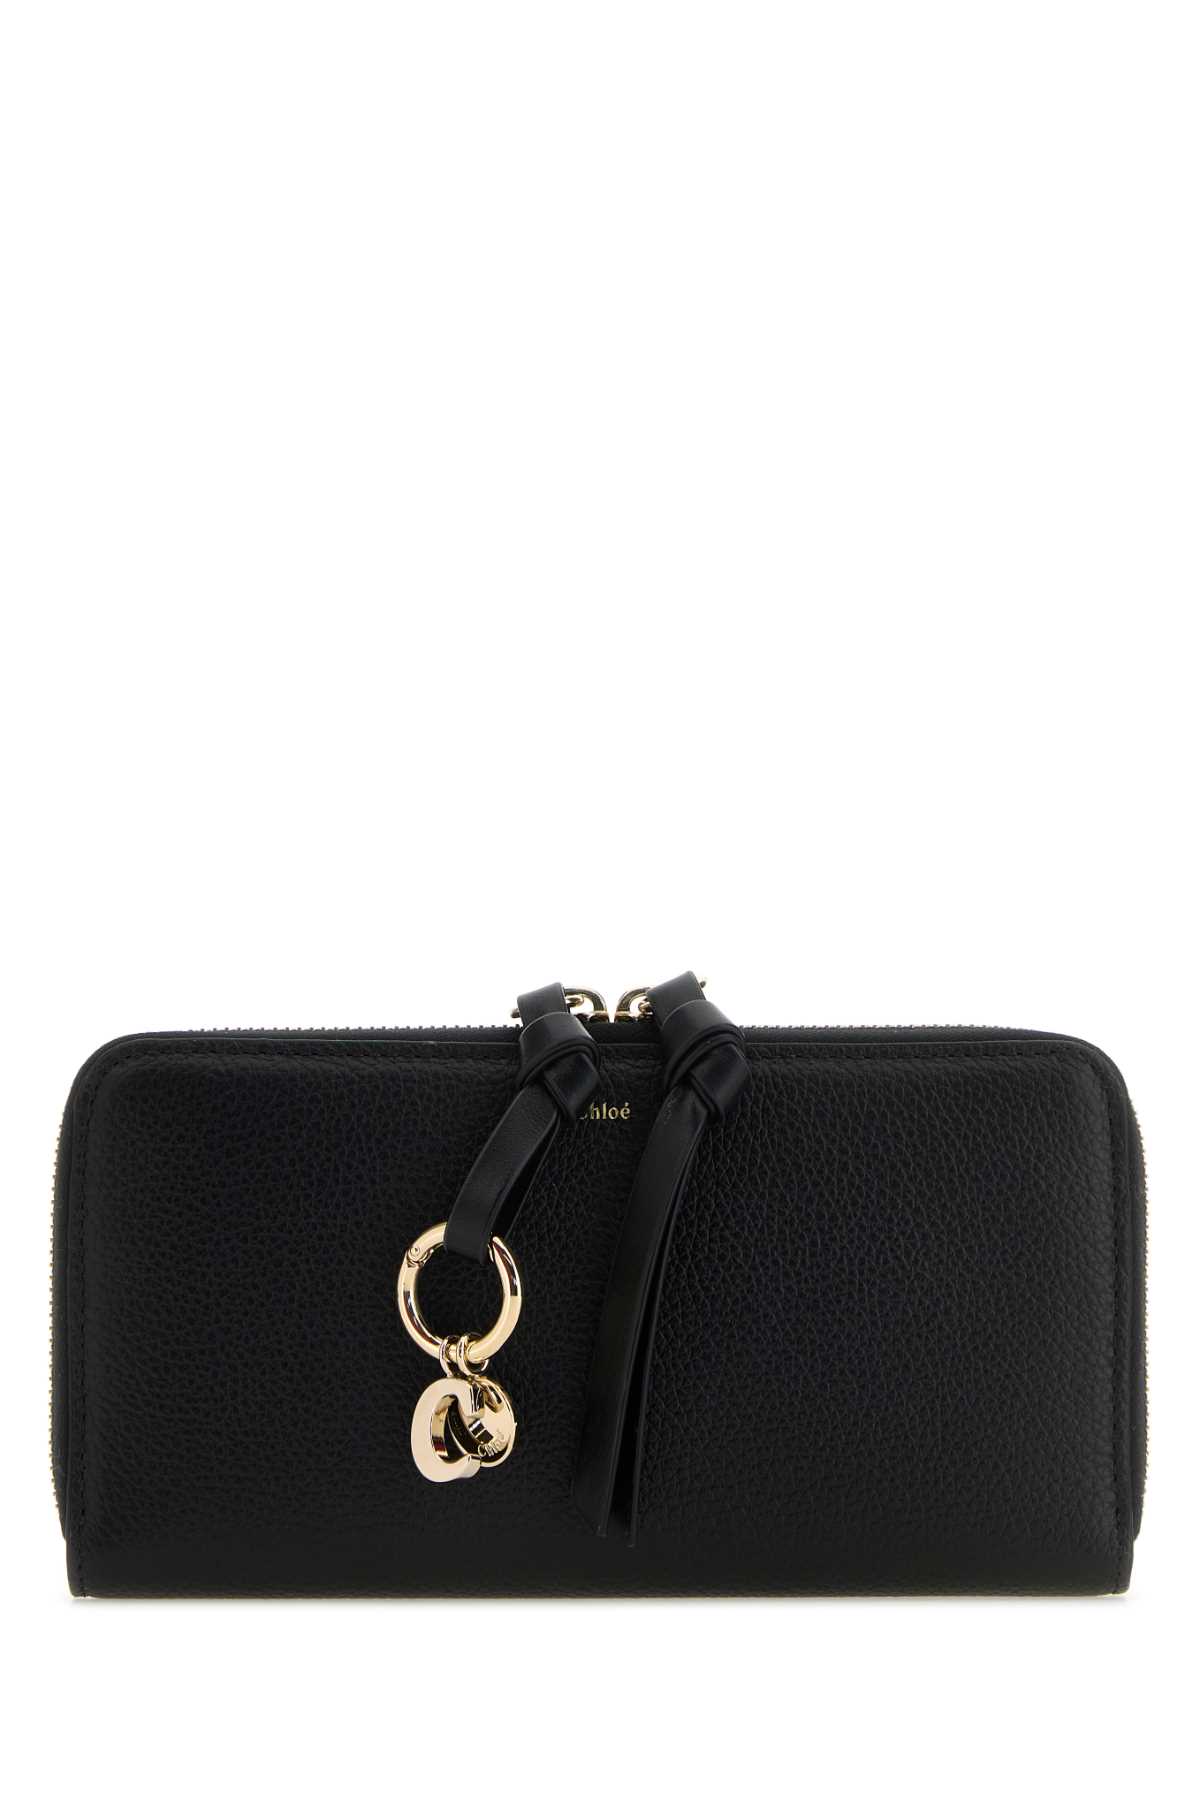 Chloé Black Leather Wallet In 001